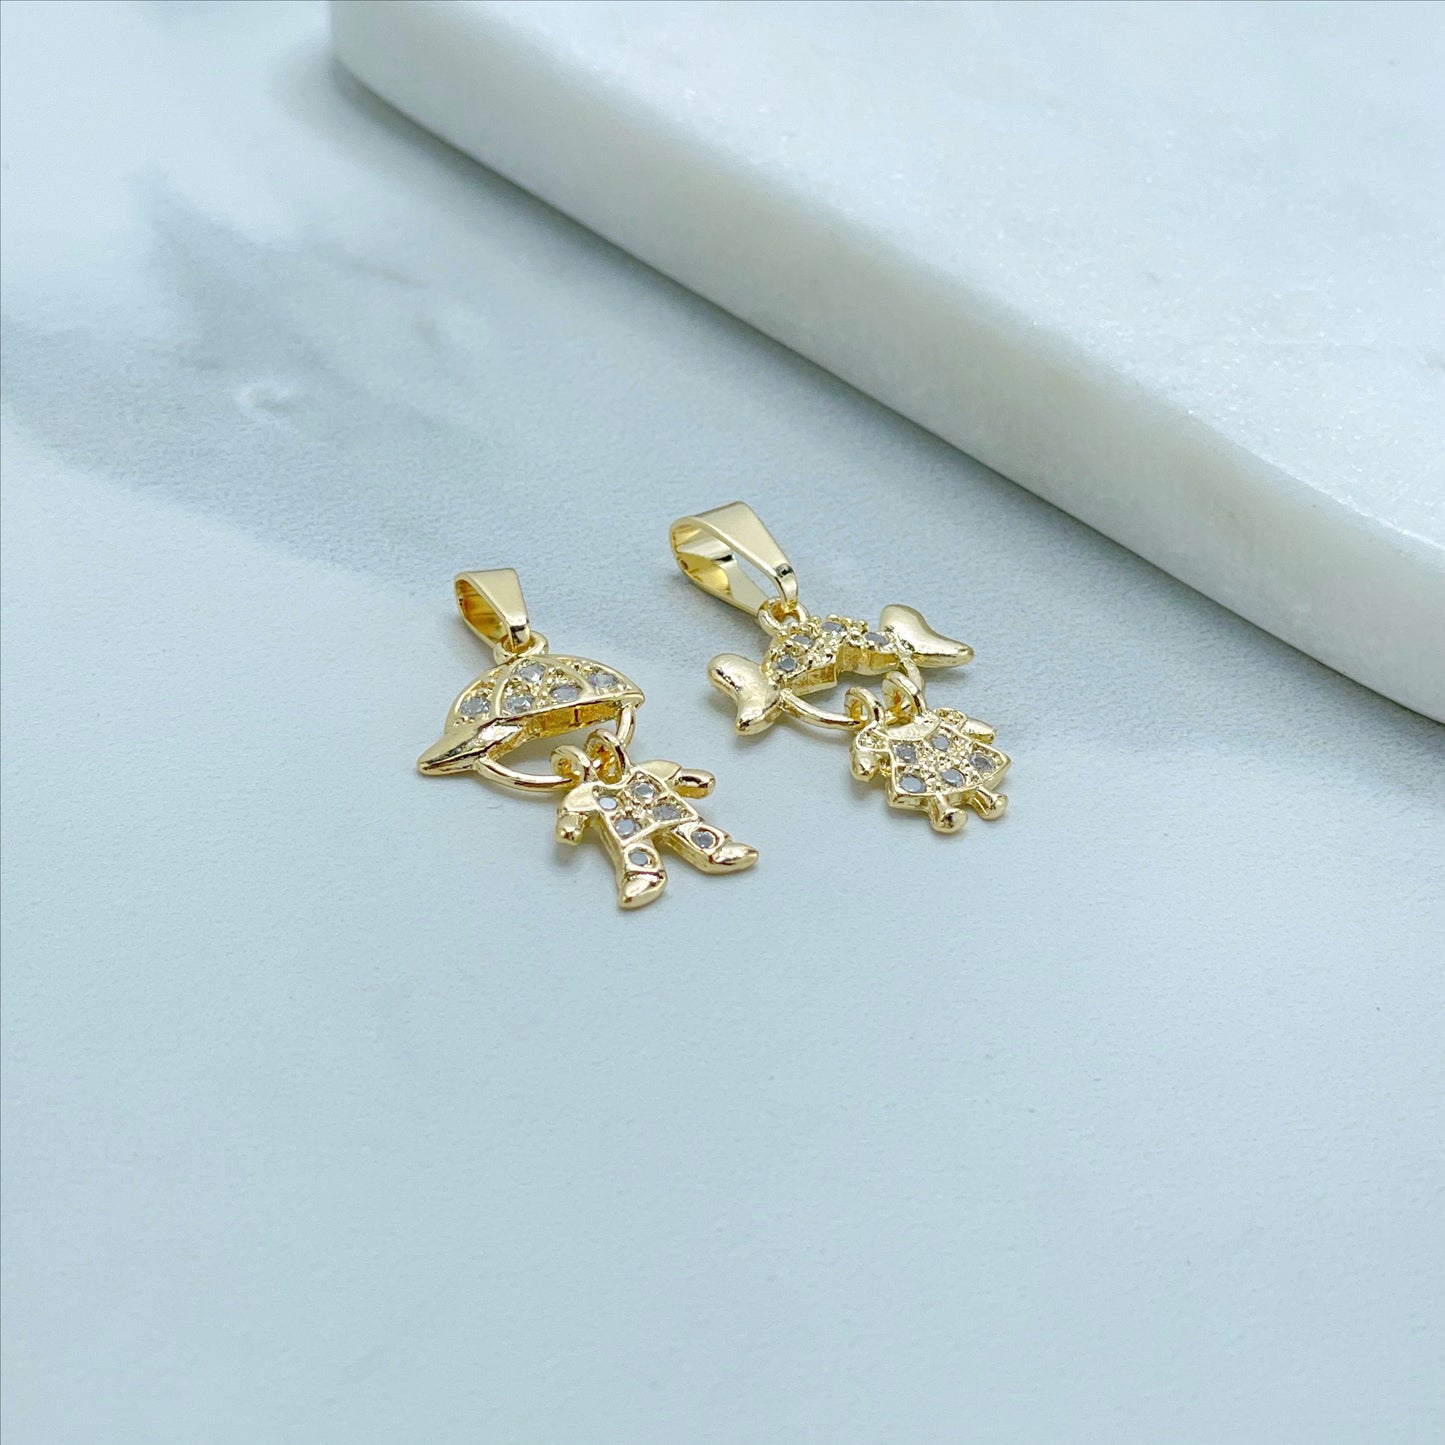 18k Gold Filled Boy or Girl Charms Pendant with Cubic Zirconia, Moving Head, for Wholesale and Jewelry Supplies, Family Jewelry For Mother